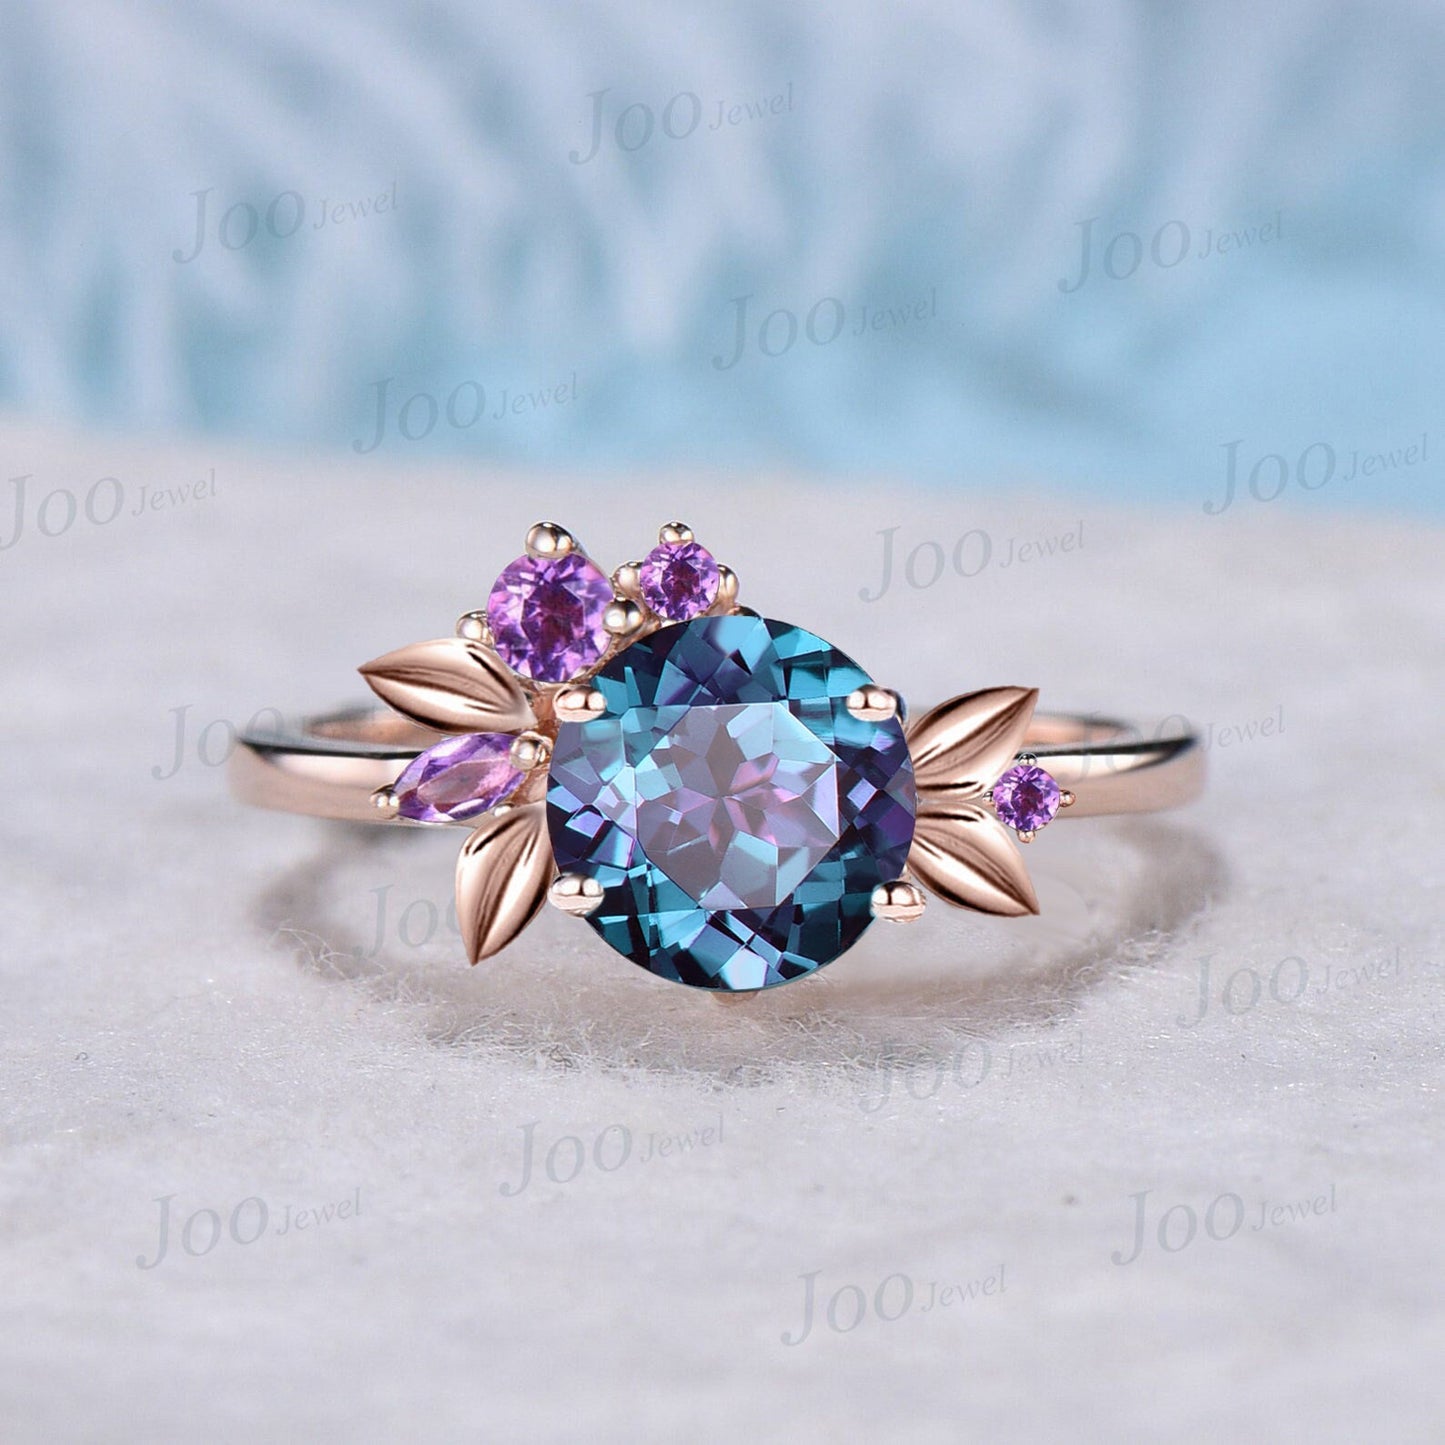 Nature Inspired Color-Change Alexandrite Engagement Ring 10K Rose Gold 1ct Round Cut Alexandrite Amethyst Cluster Leaf Wedding Promise Gifts